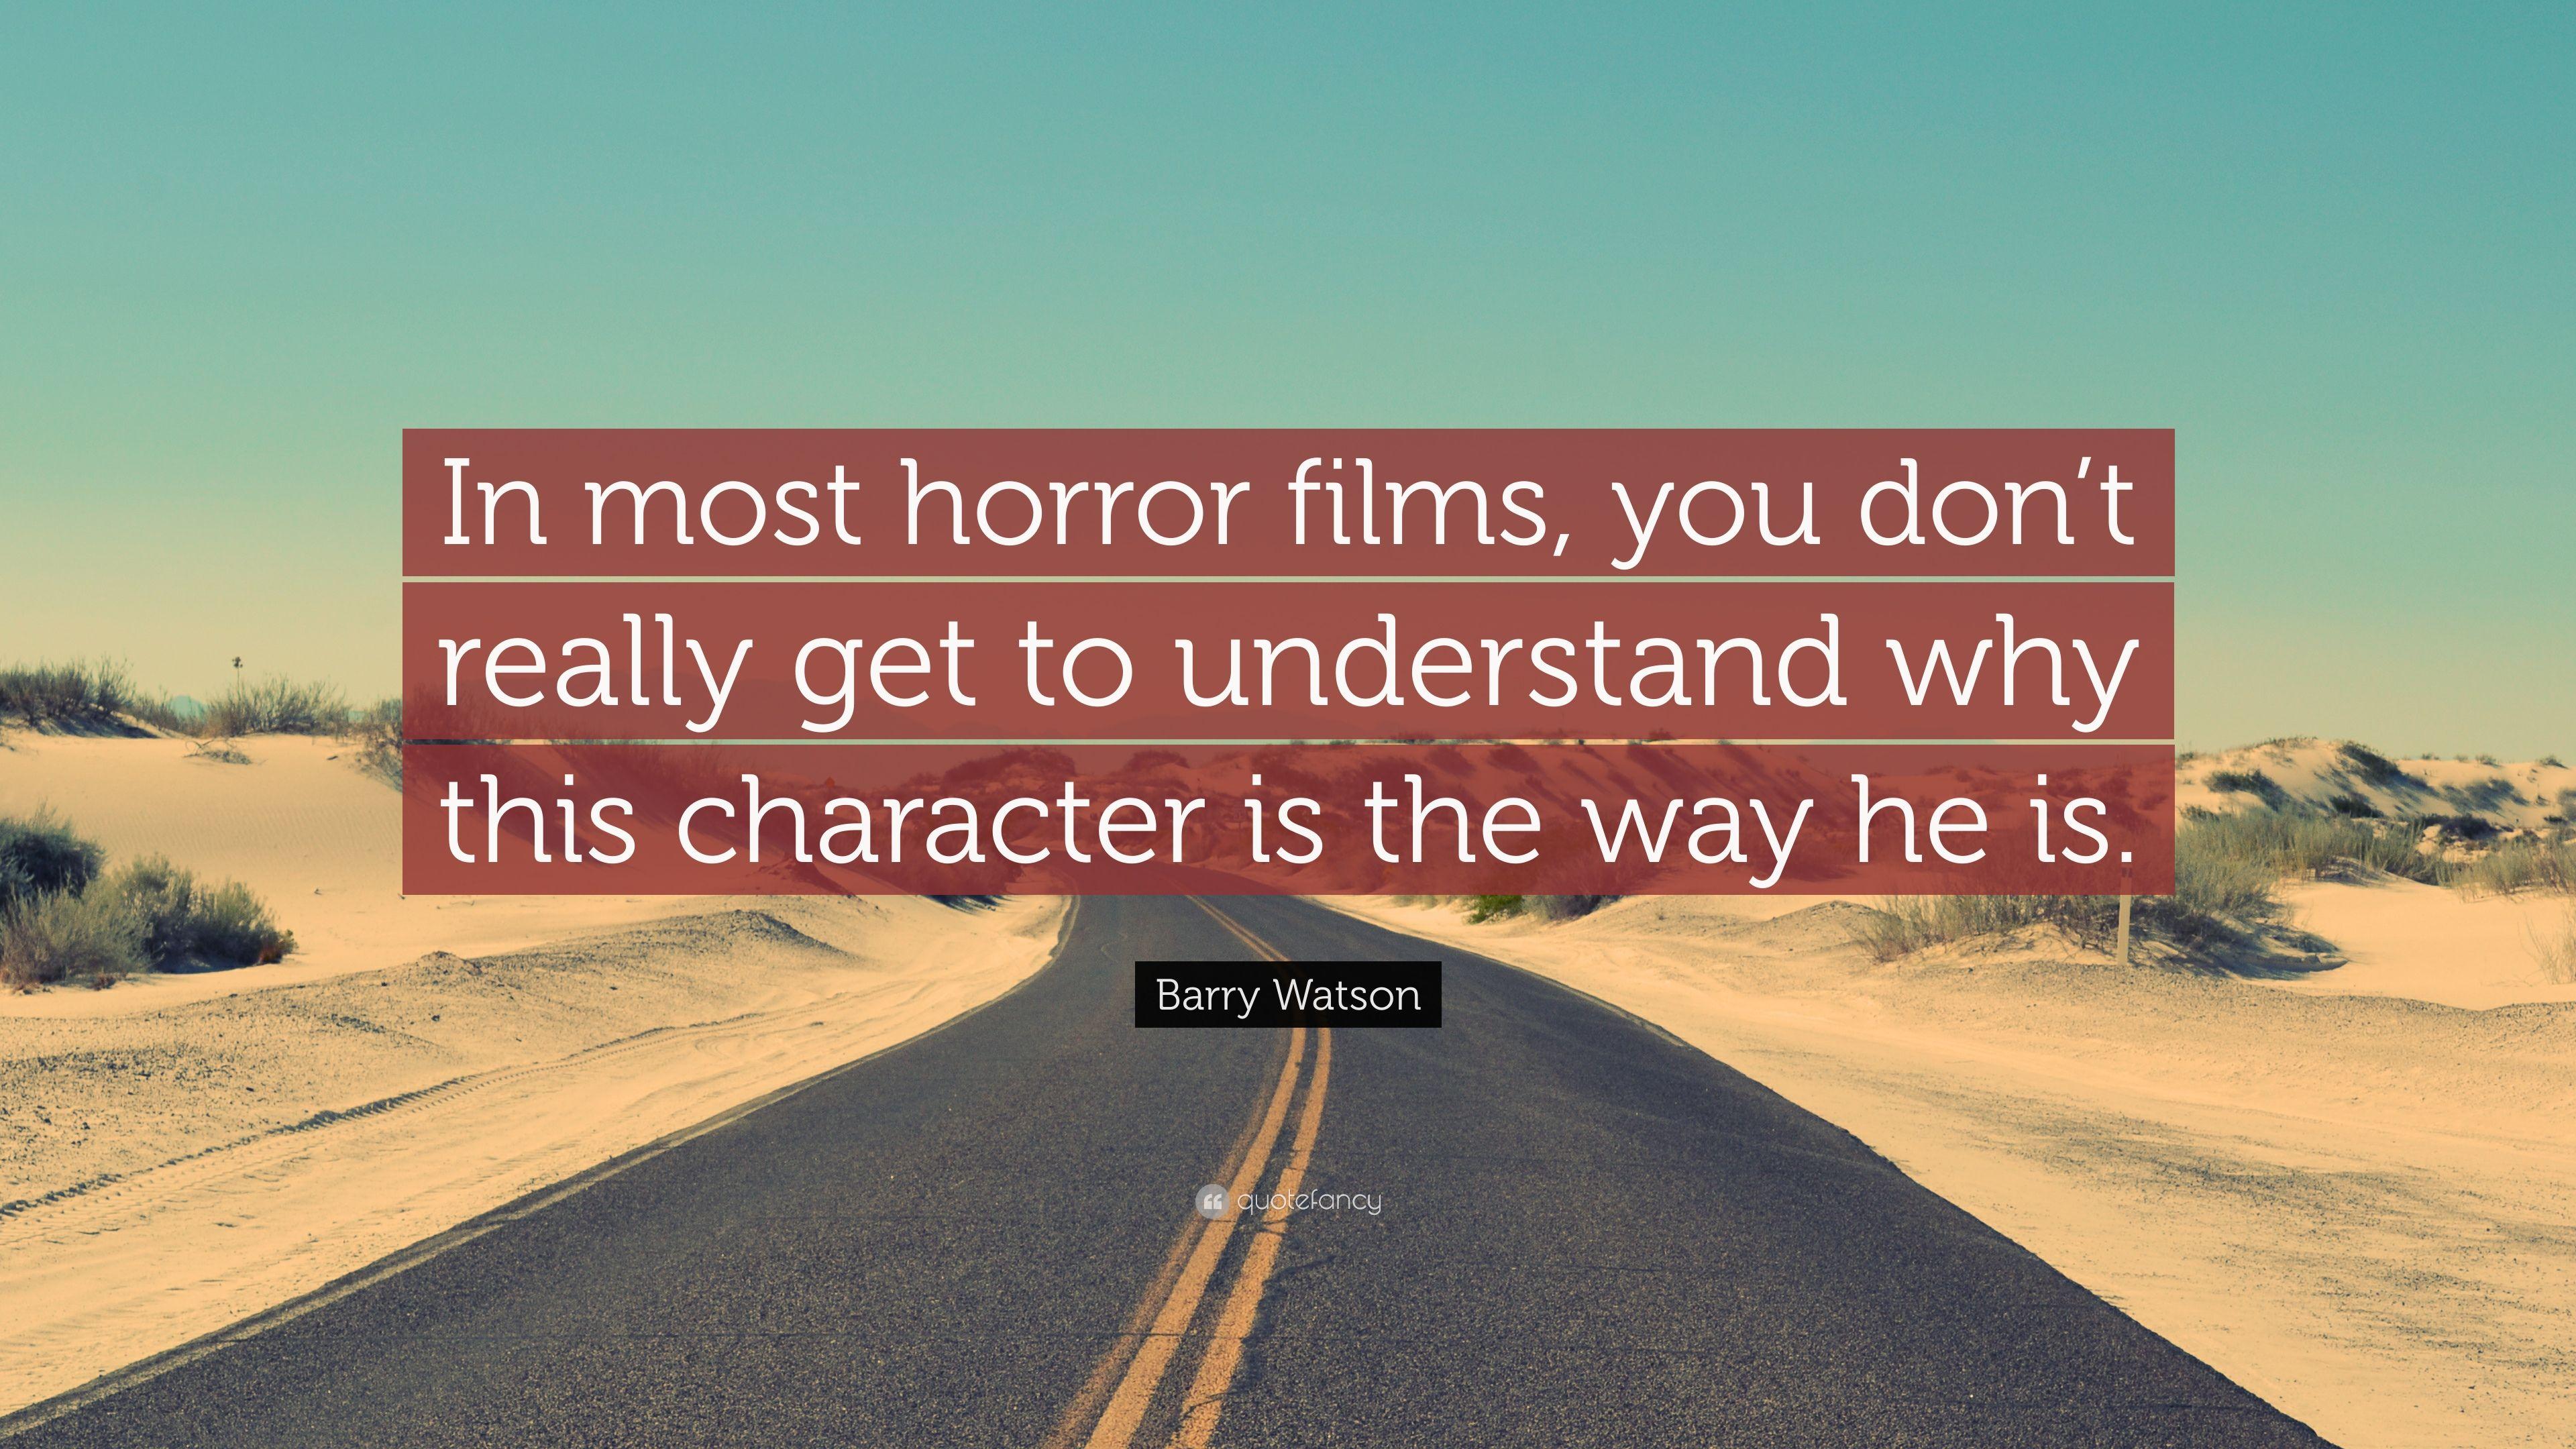 Barry Watson Quote: “In most horror films, you don't really get to